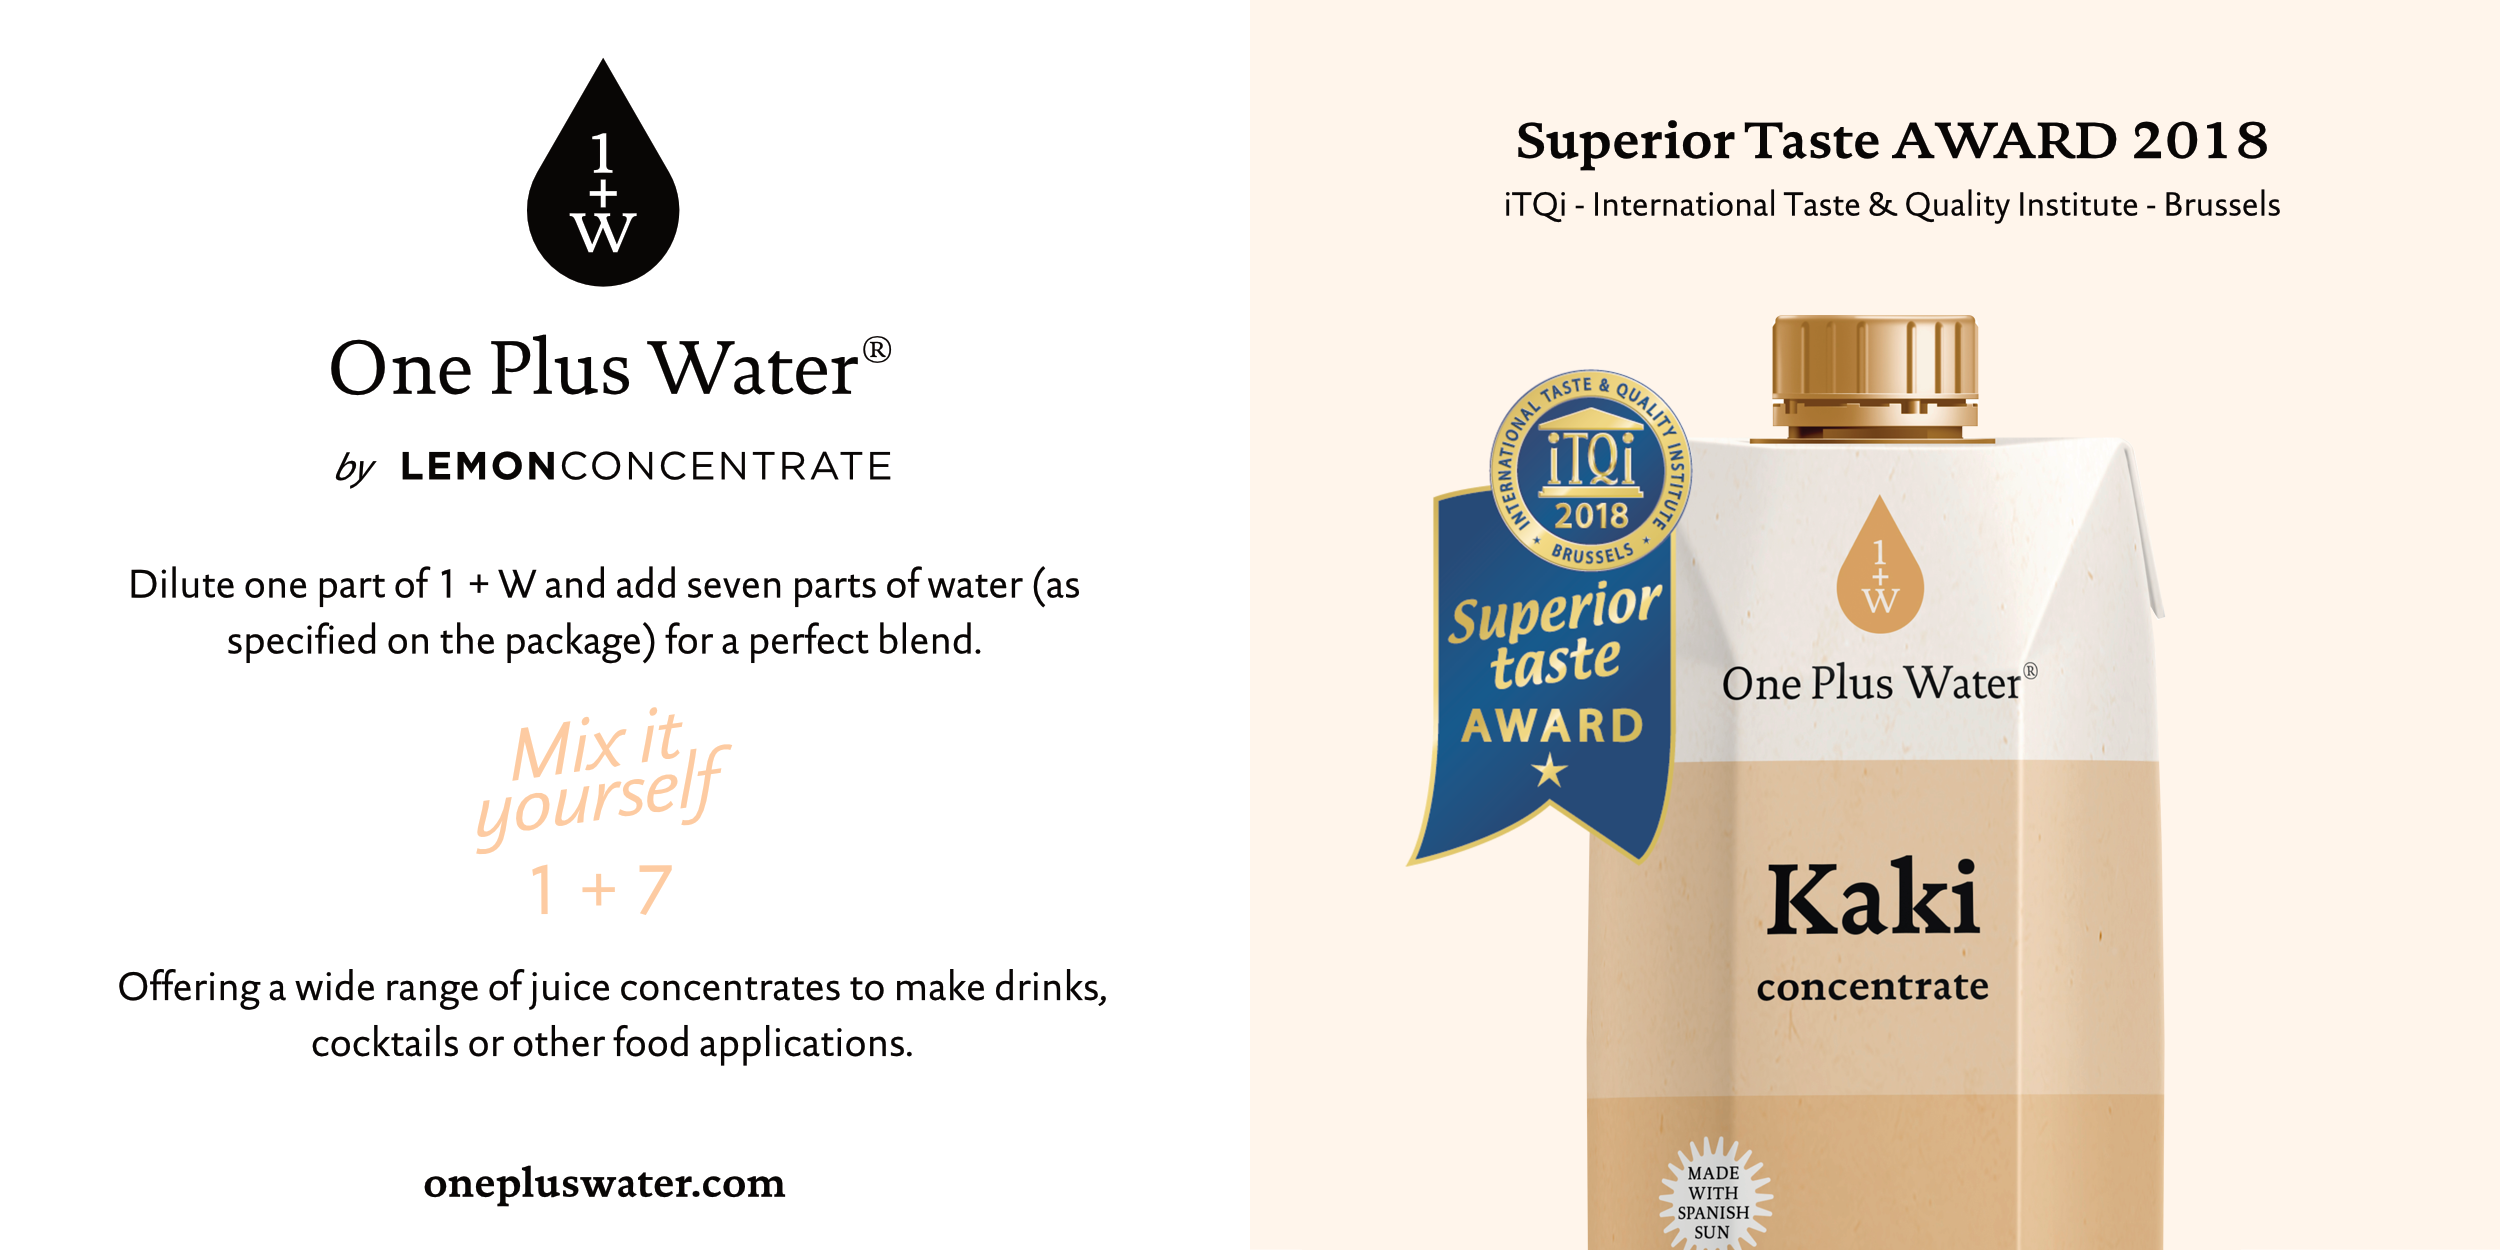 One Plus Water - A new fruit experience - Awarded in iTQi Awards 2018-image- 1